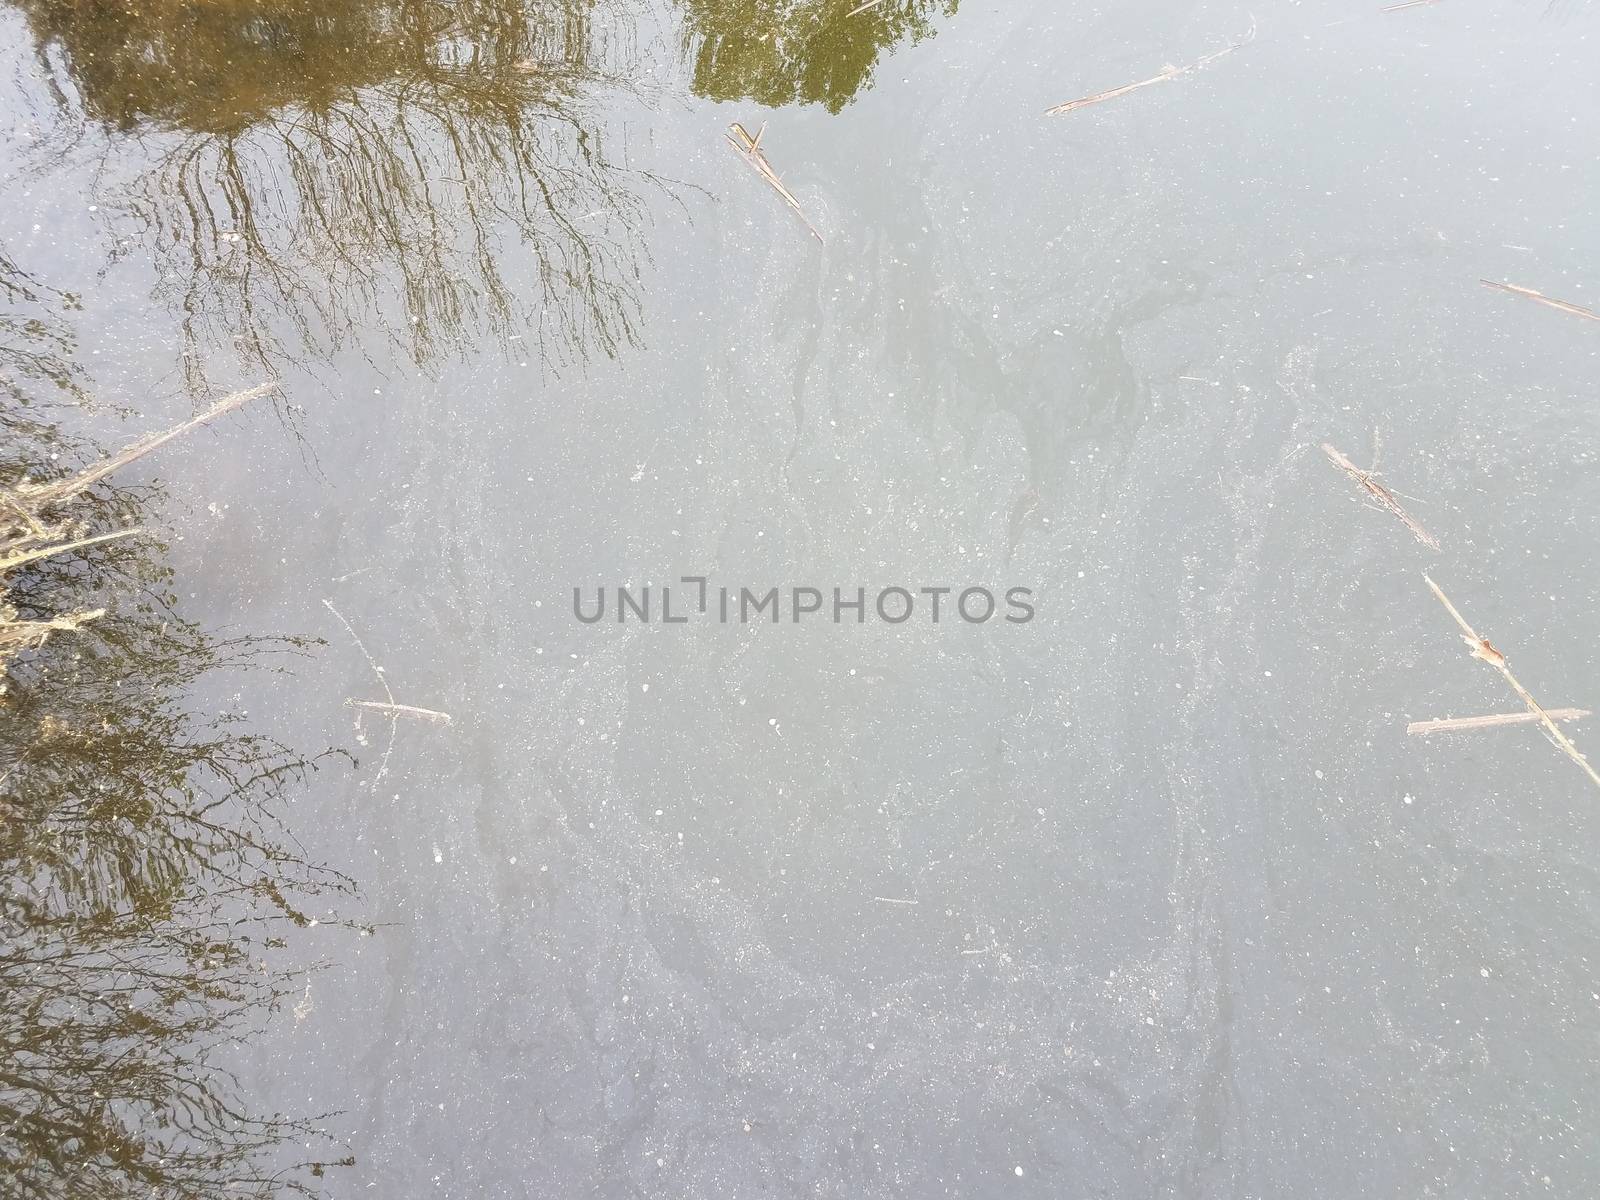 dirty or murky stagnant water with reflection of grasses by stockphotofan1